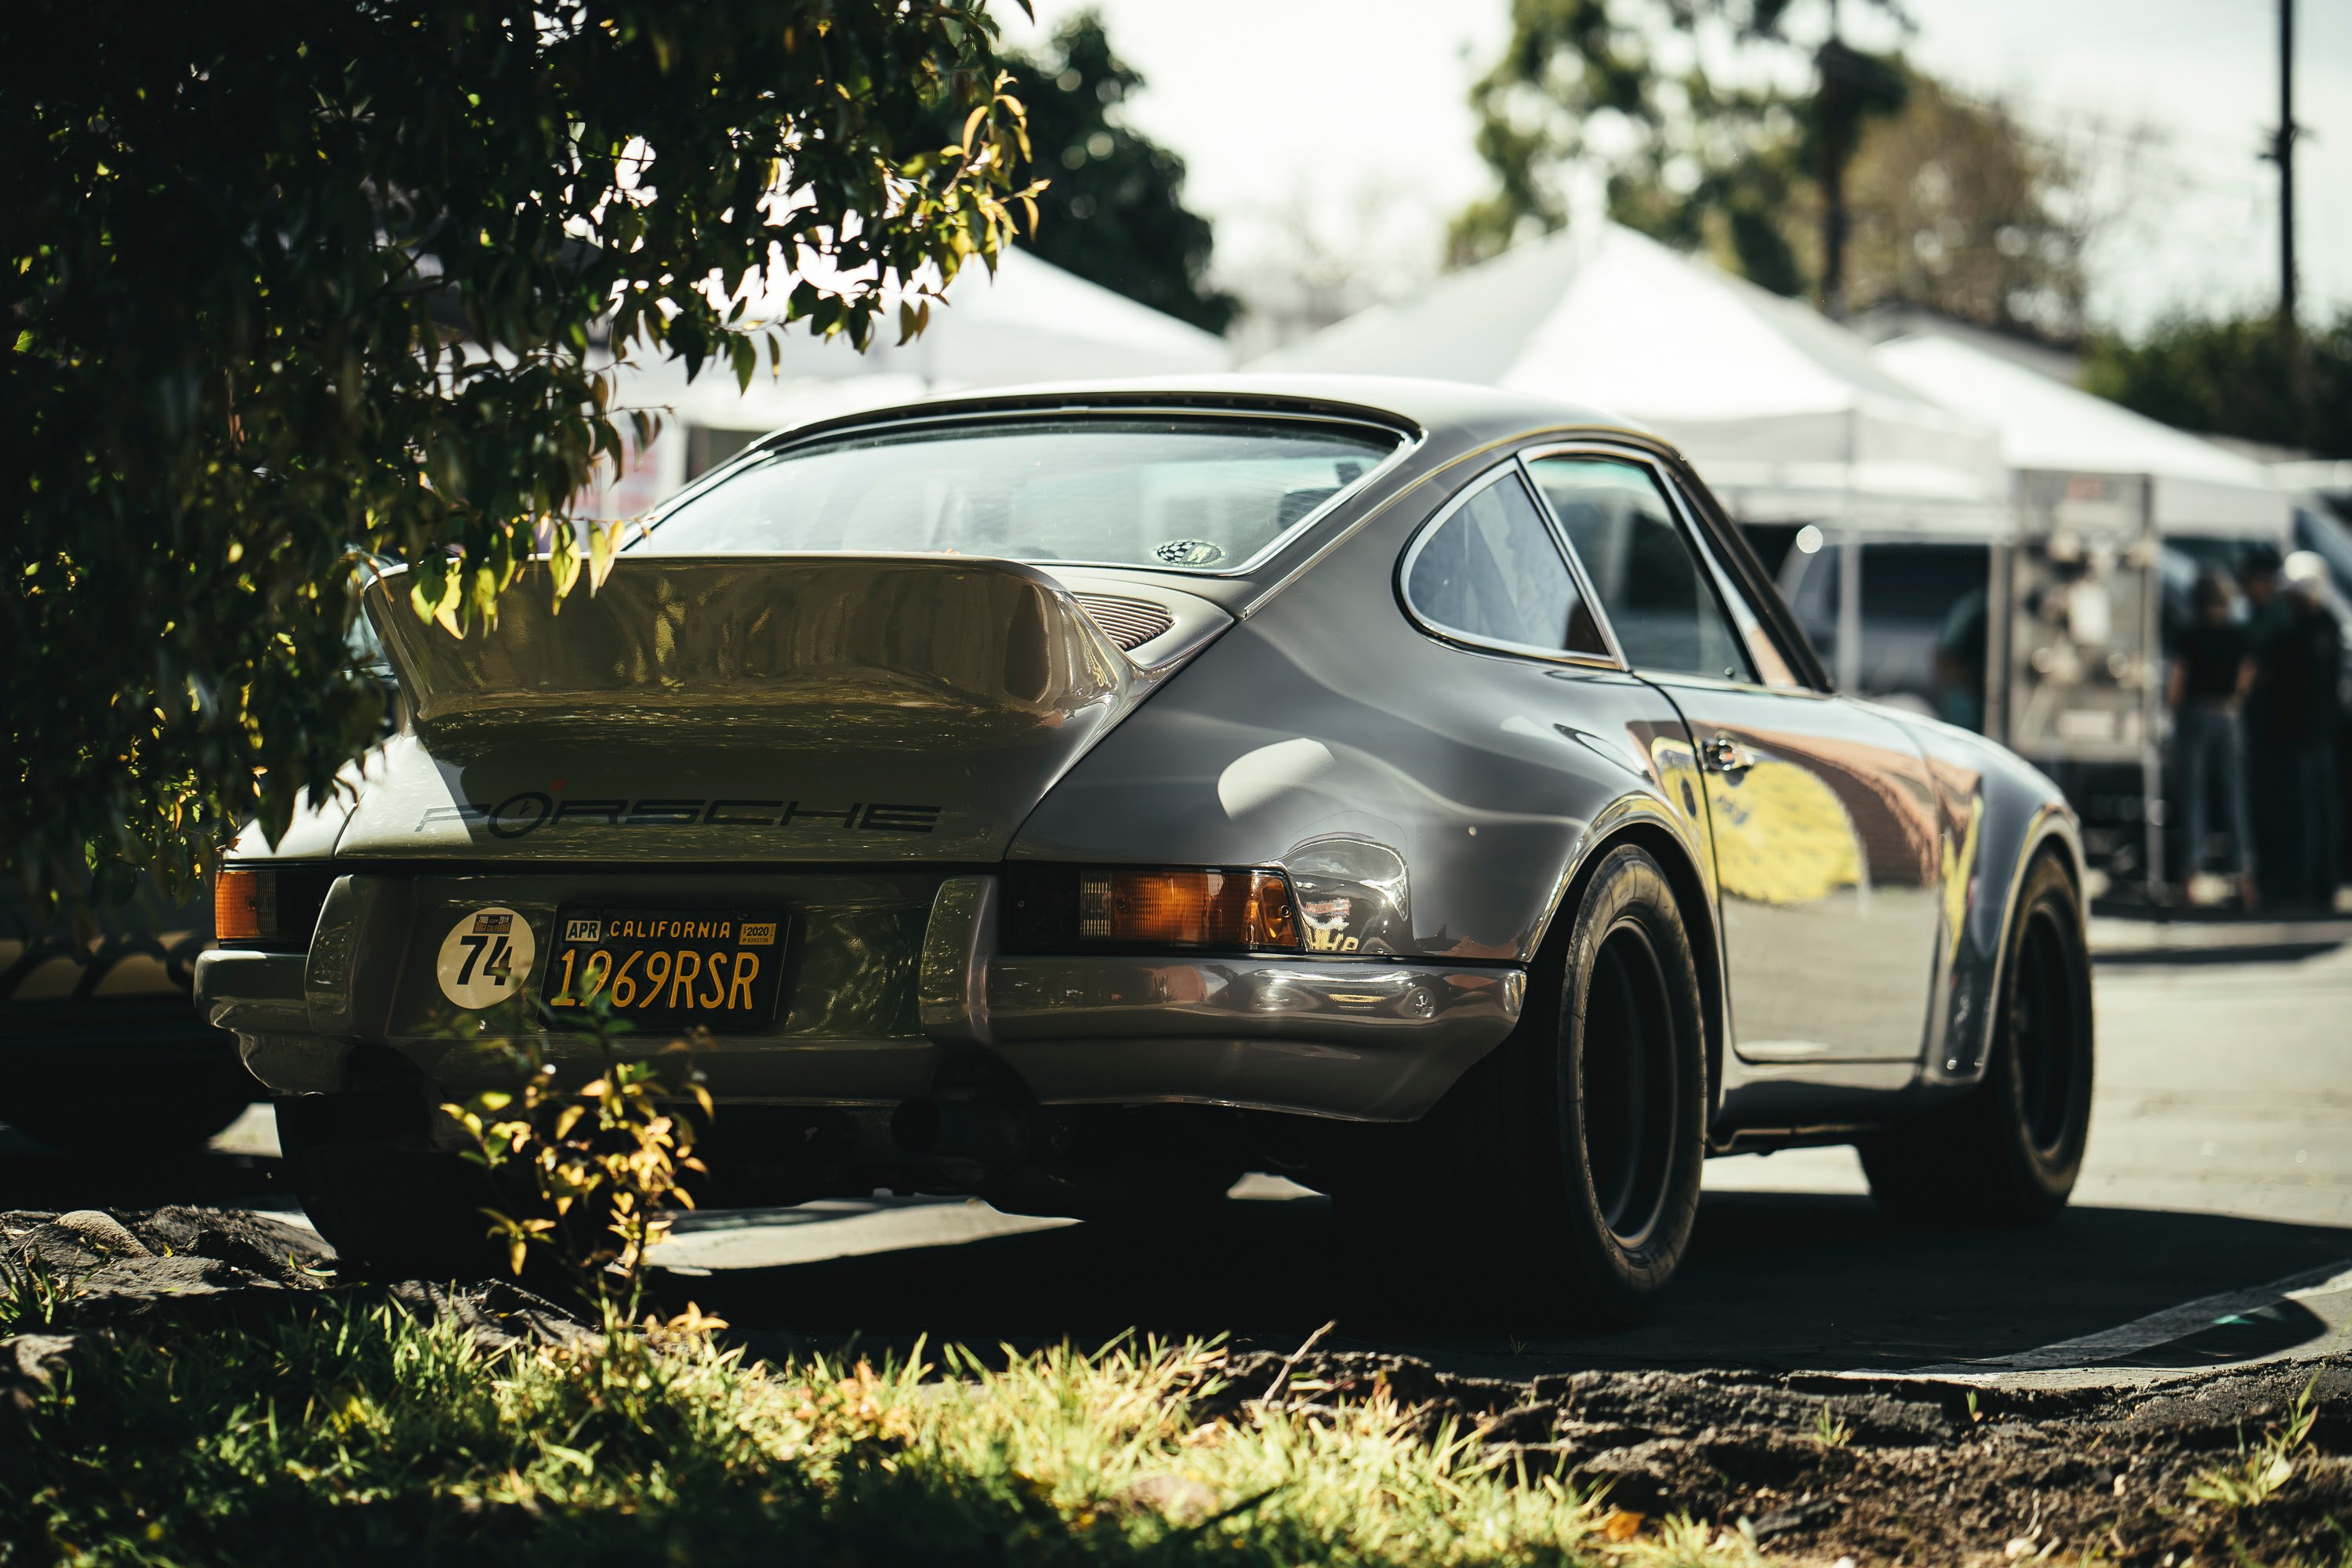 A 1969 RSR style 911 at the Pelican Parts open house.